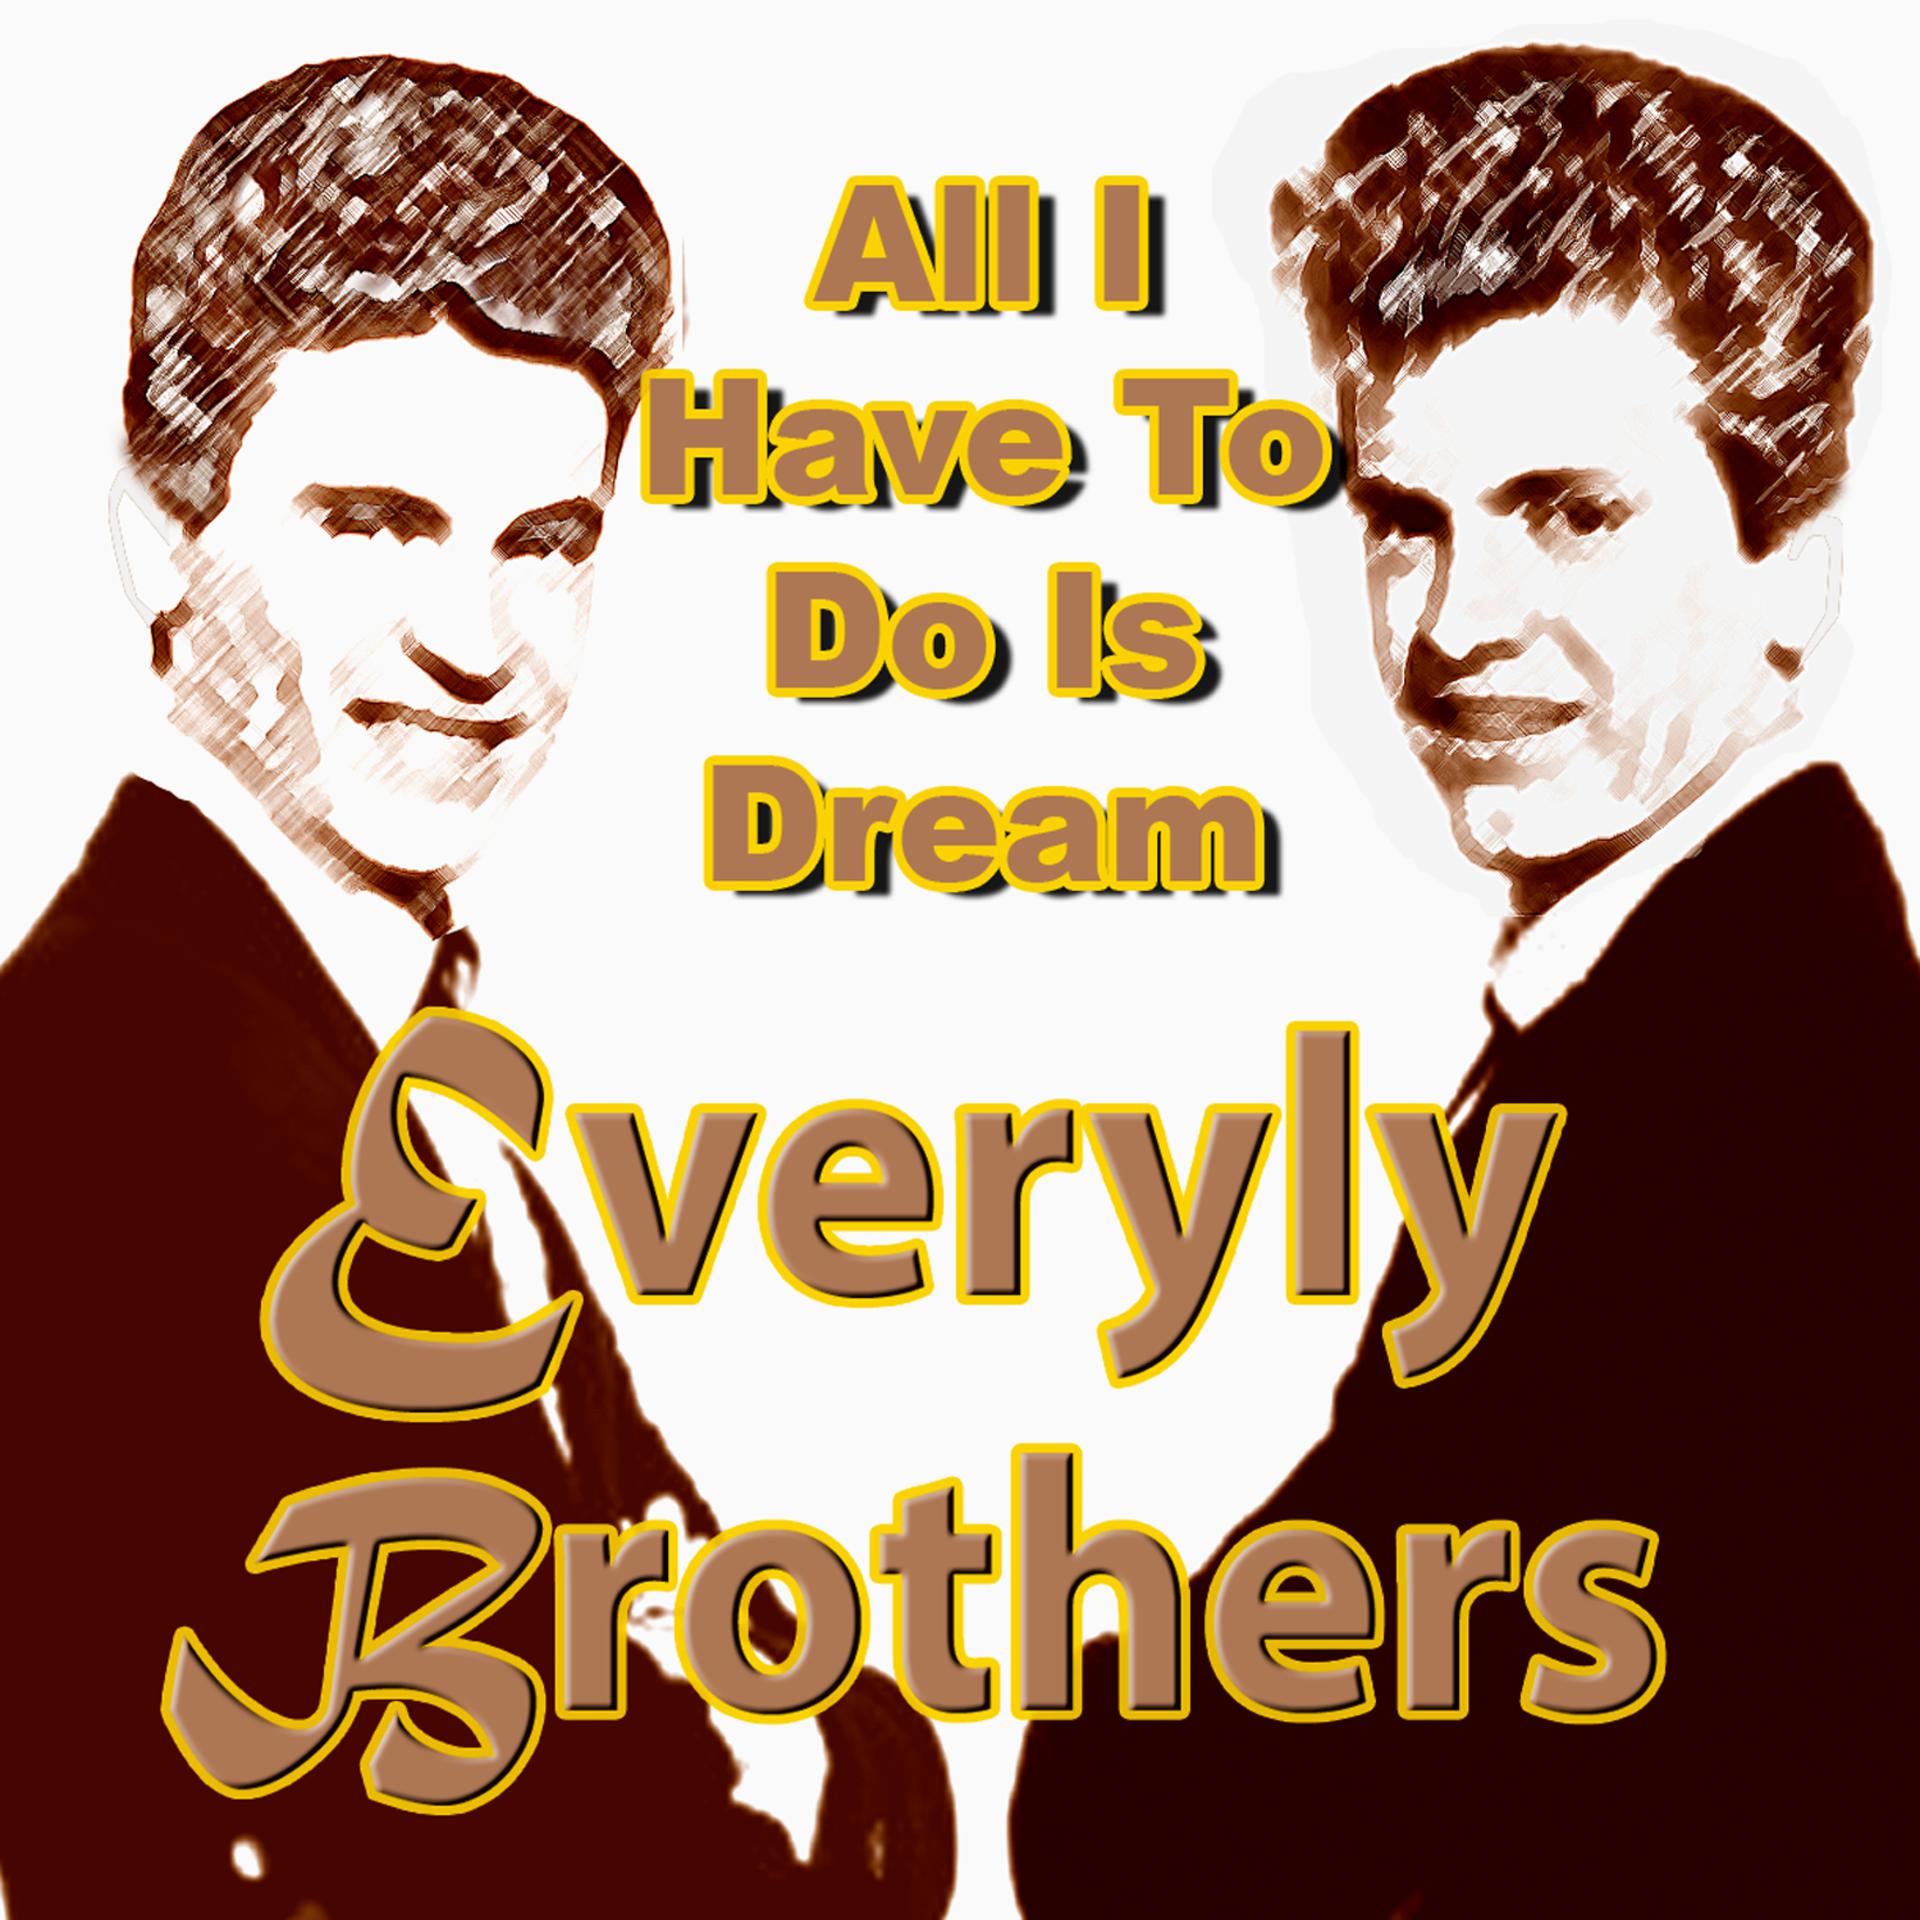 Постер альбома "All I Do Is Dream" Everly Brothers